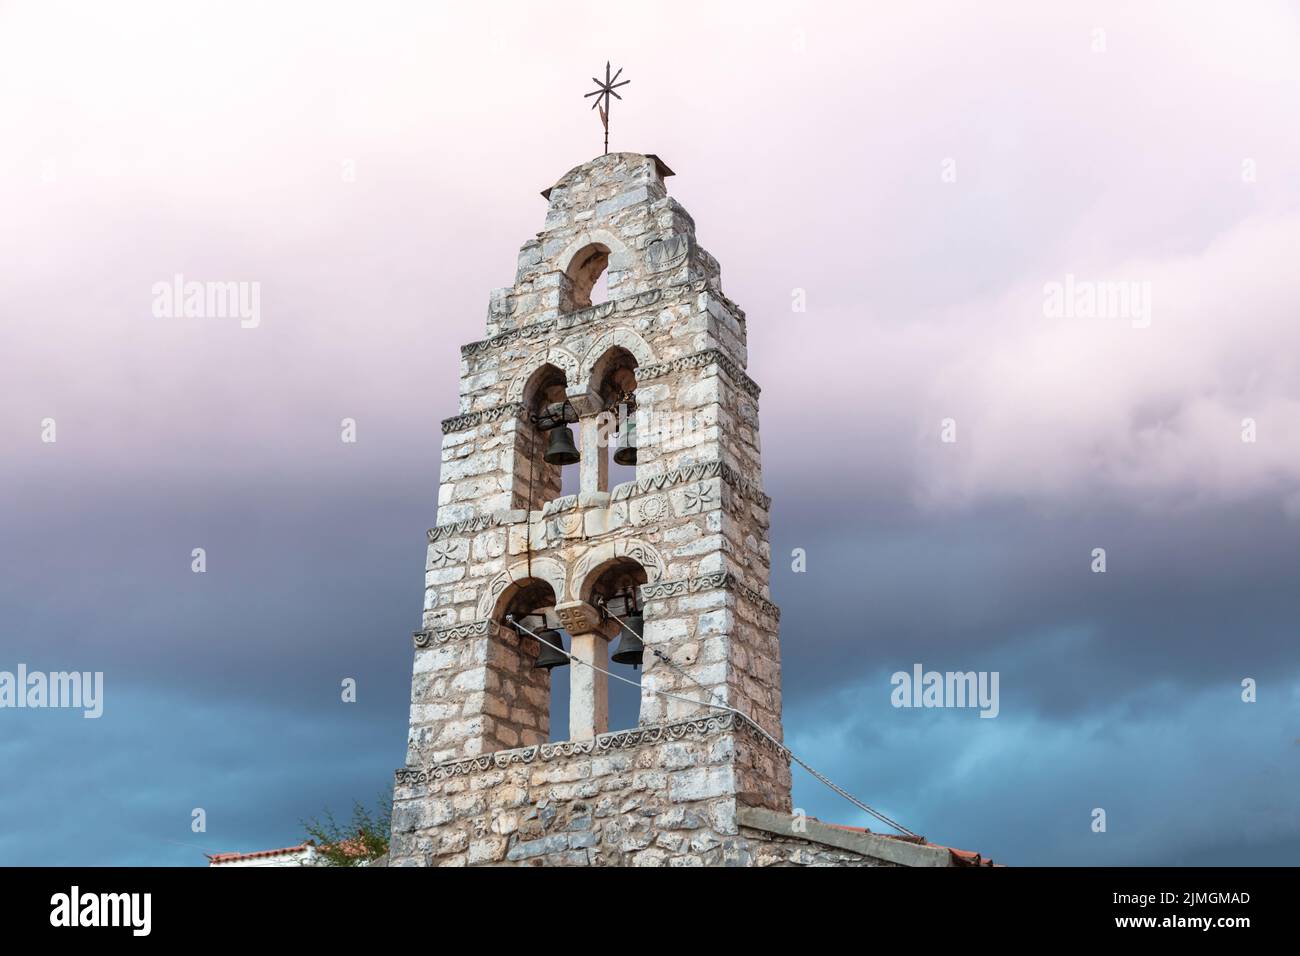 Belfry with four metal bronze bells at Mani Laconia, Peloponnese Greece. Under view of traditional stonewall bell tower with cross, cloudy sky backgro Stock Photo